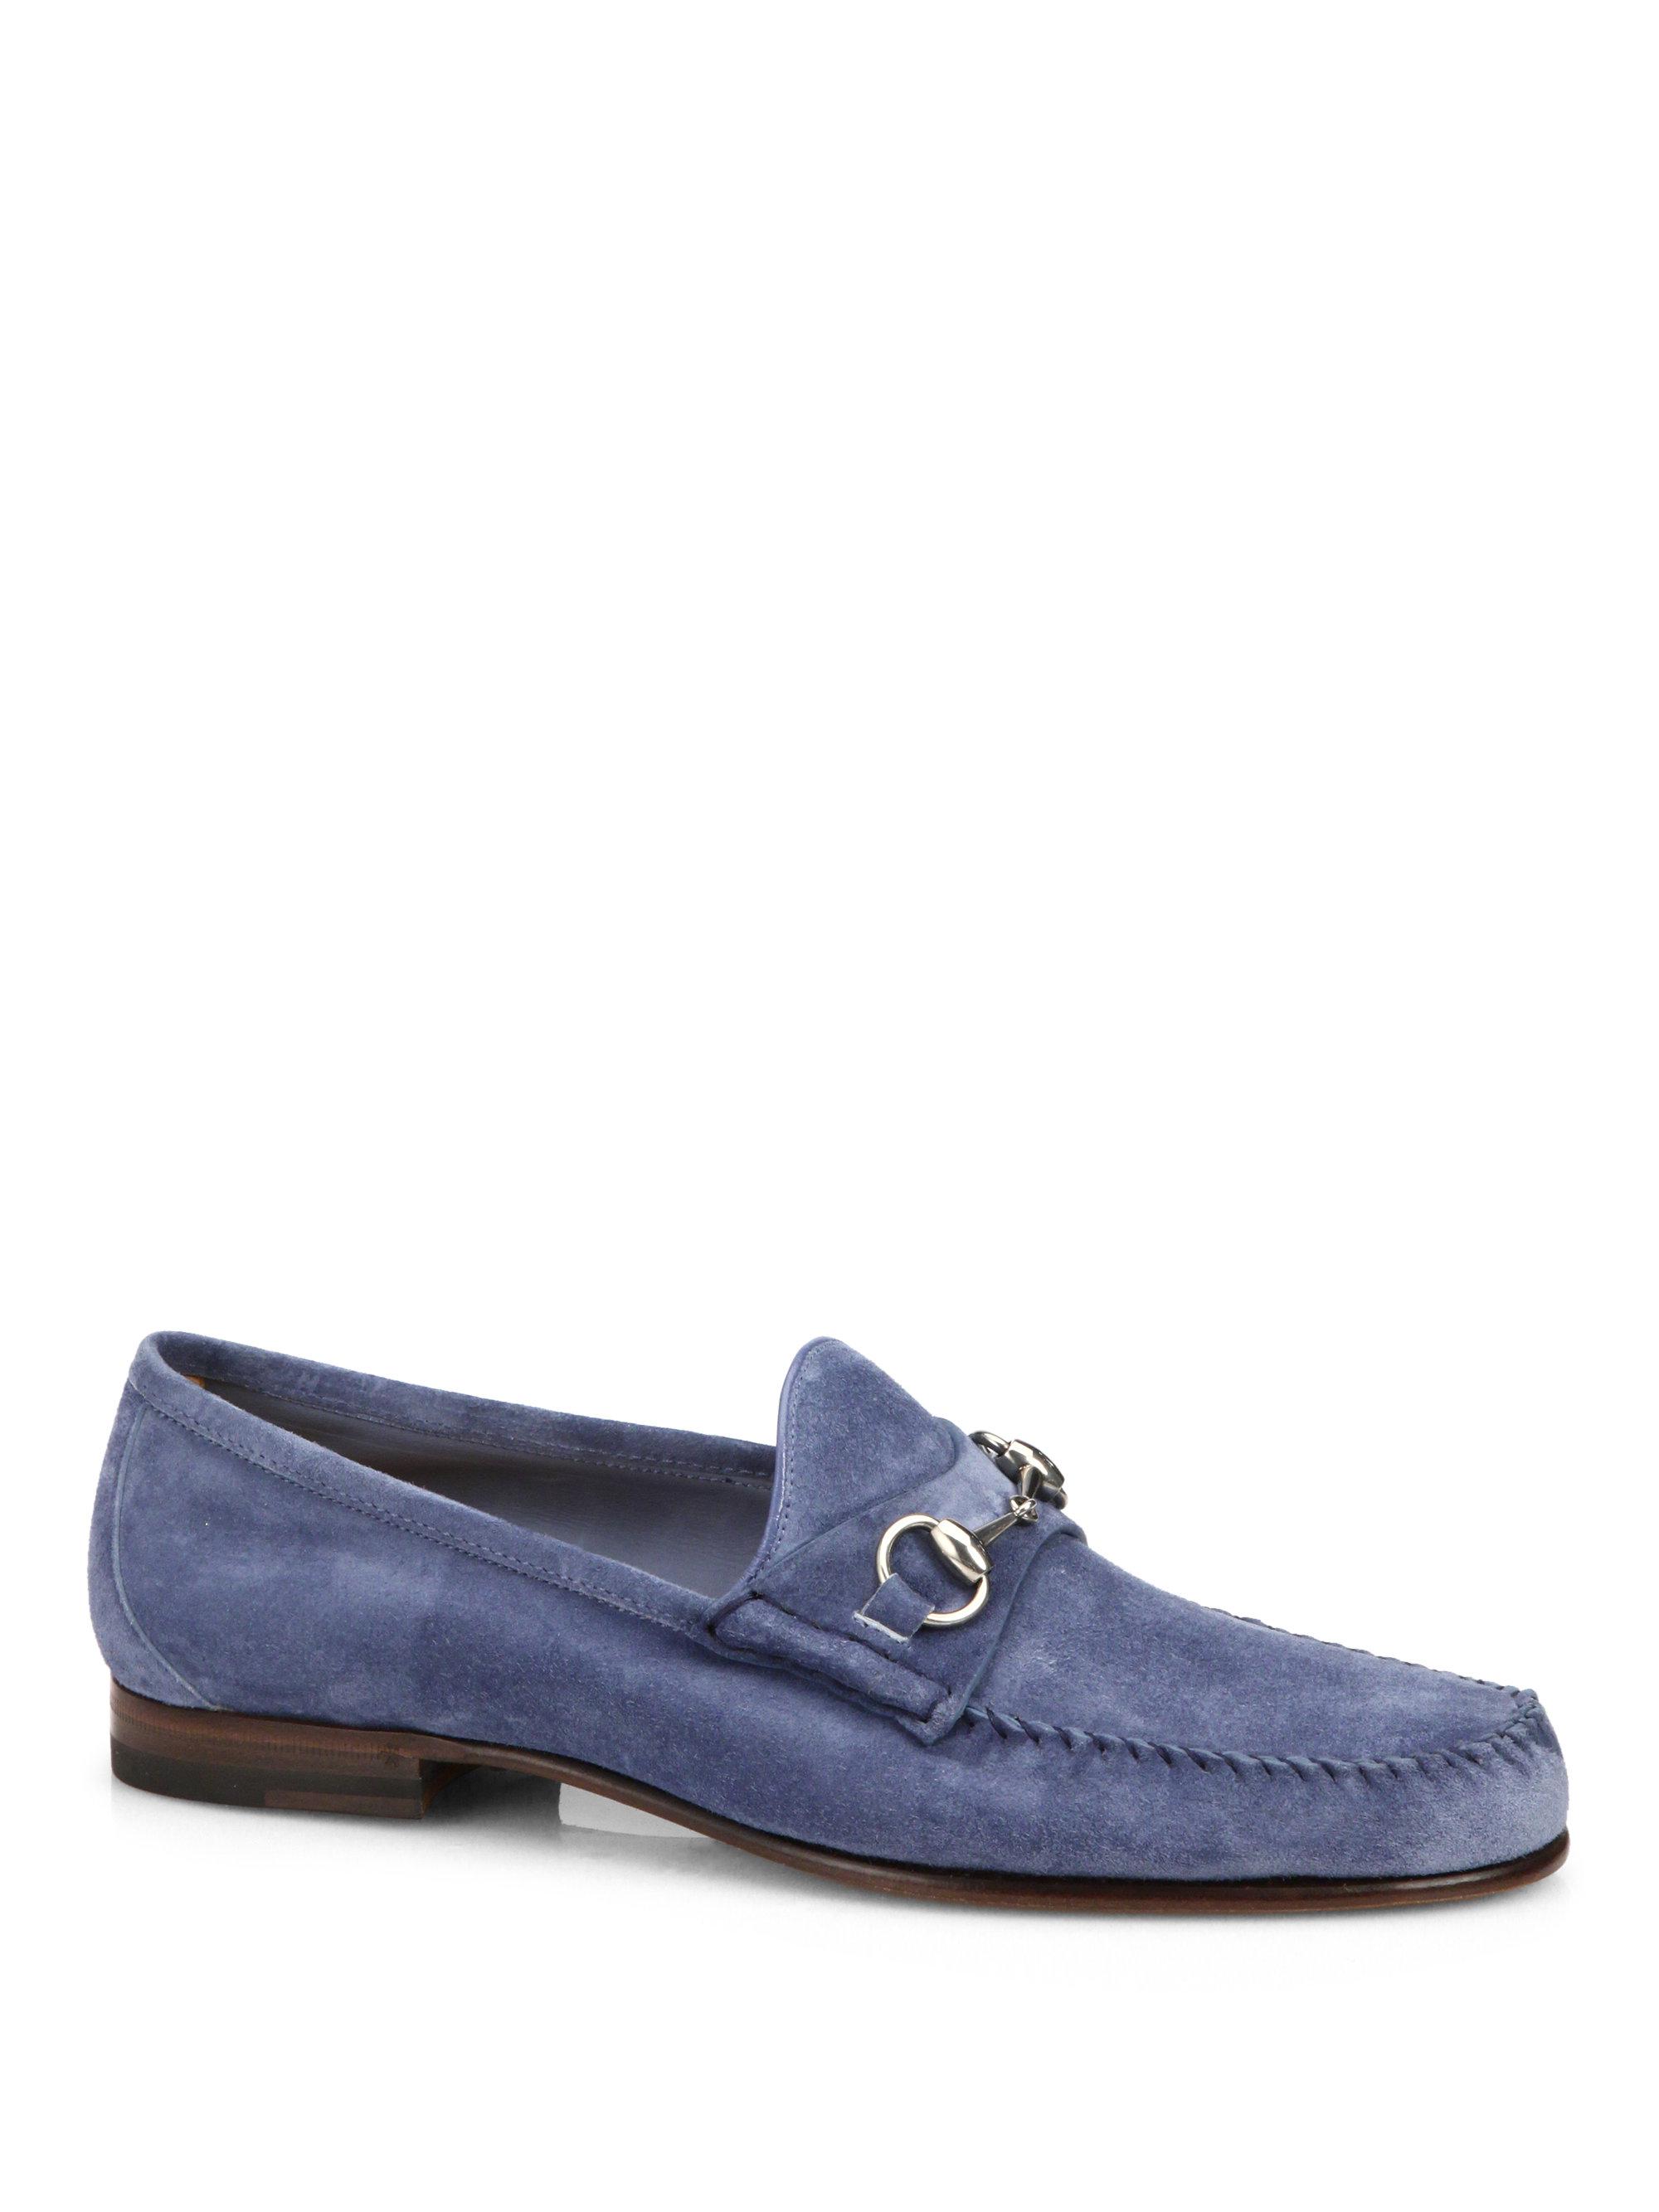 Gucci Horsebit Loafers in Blue for Men Lyst